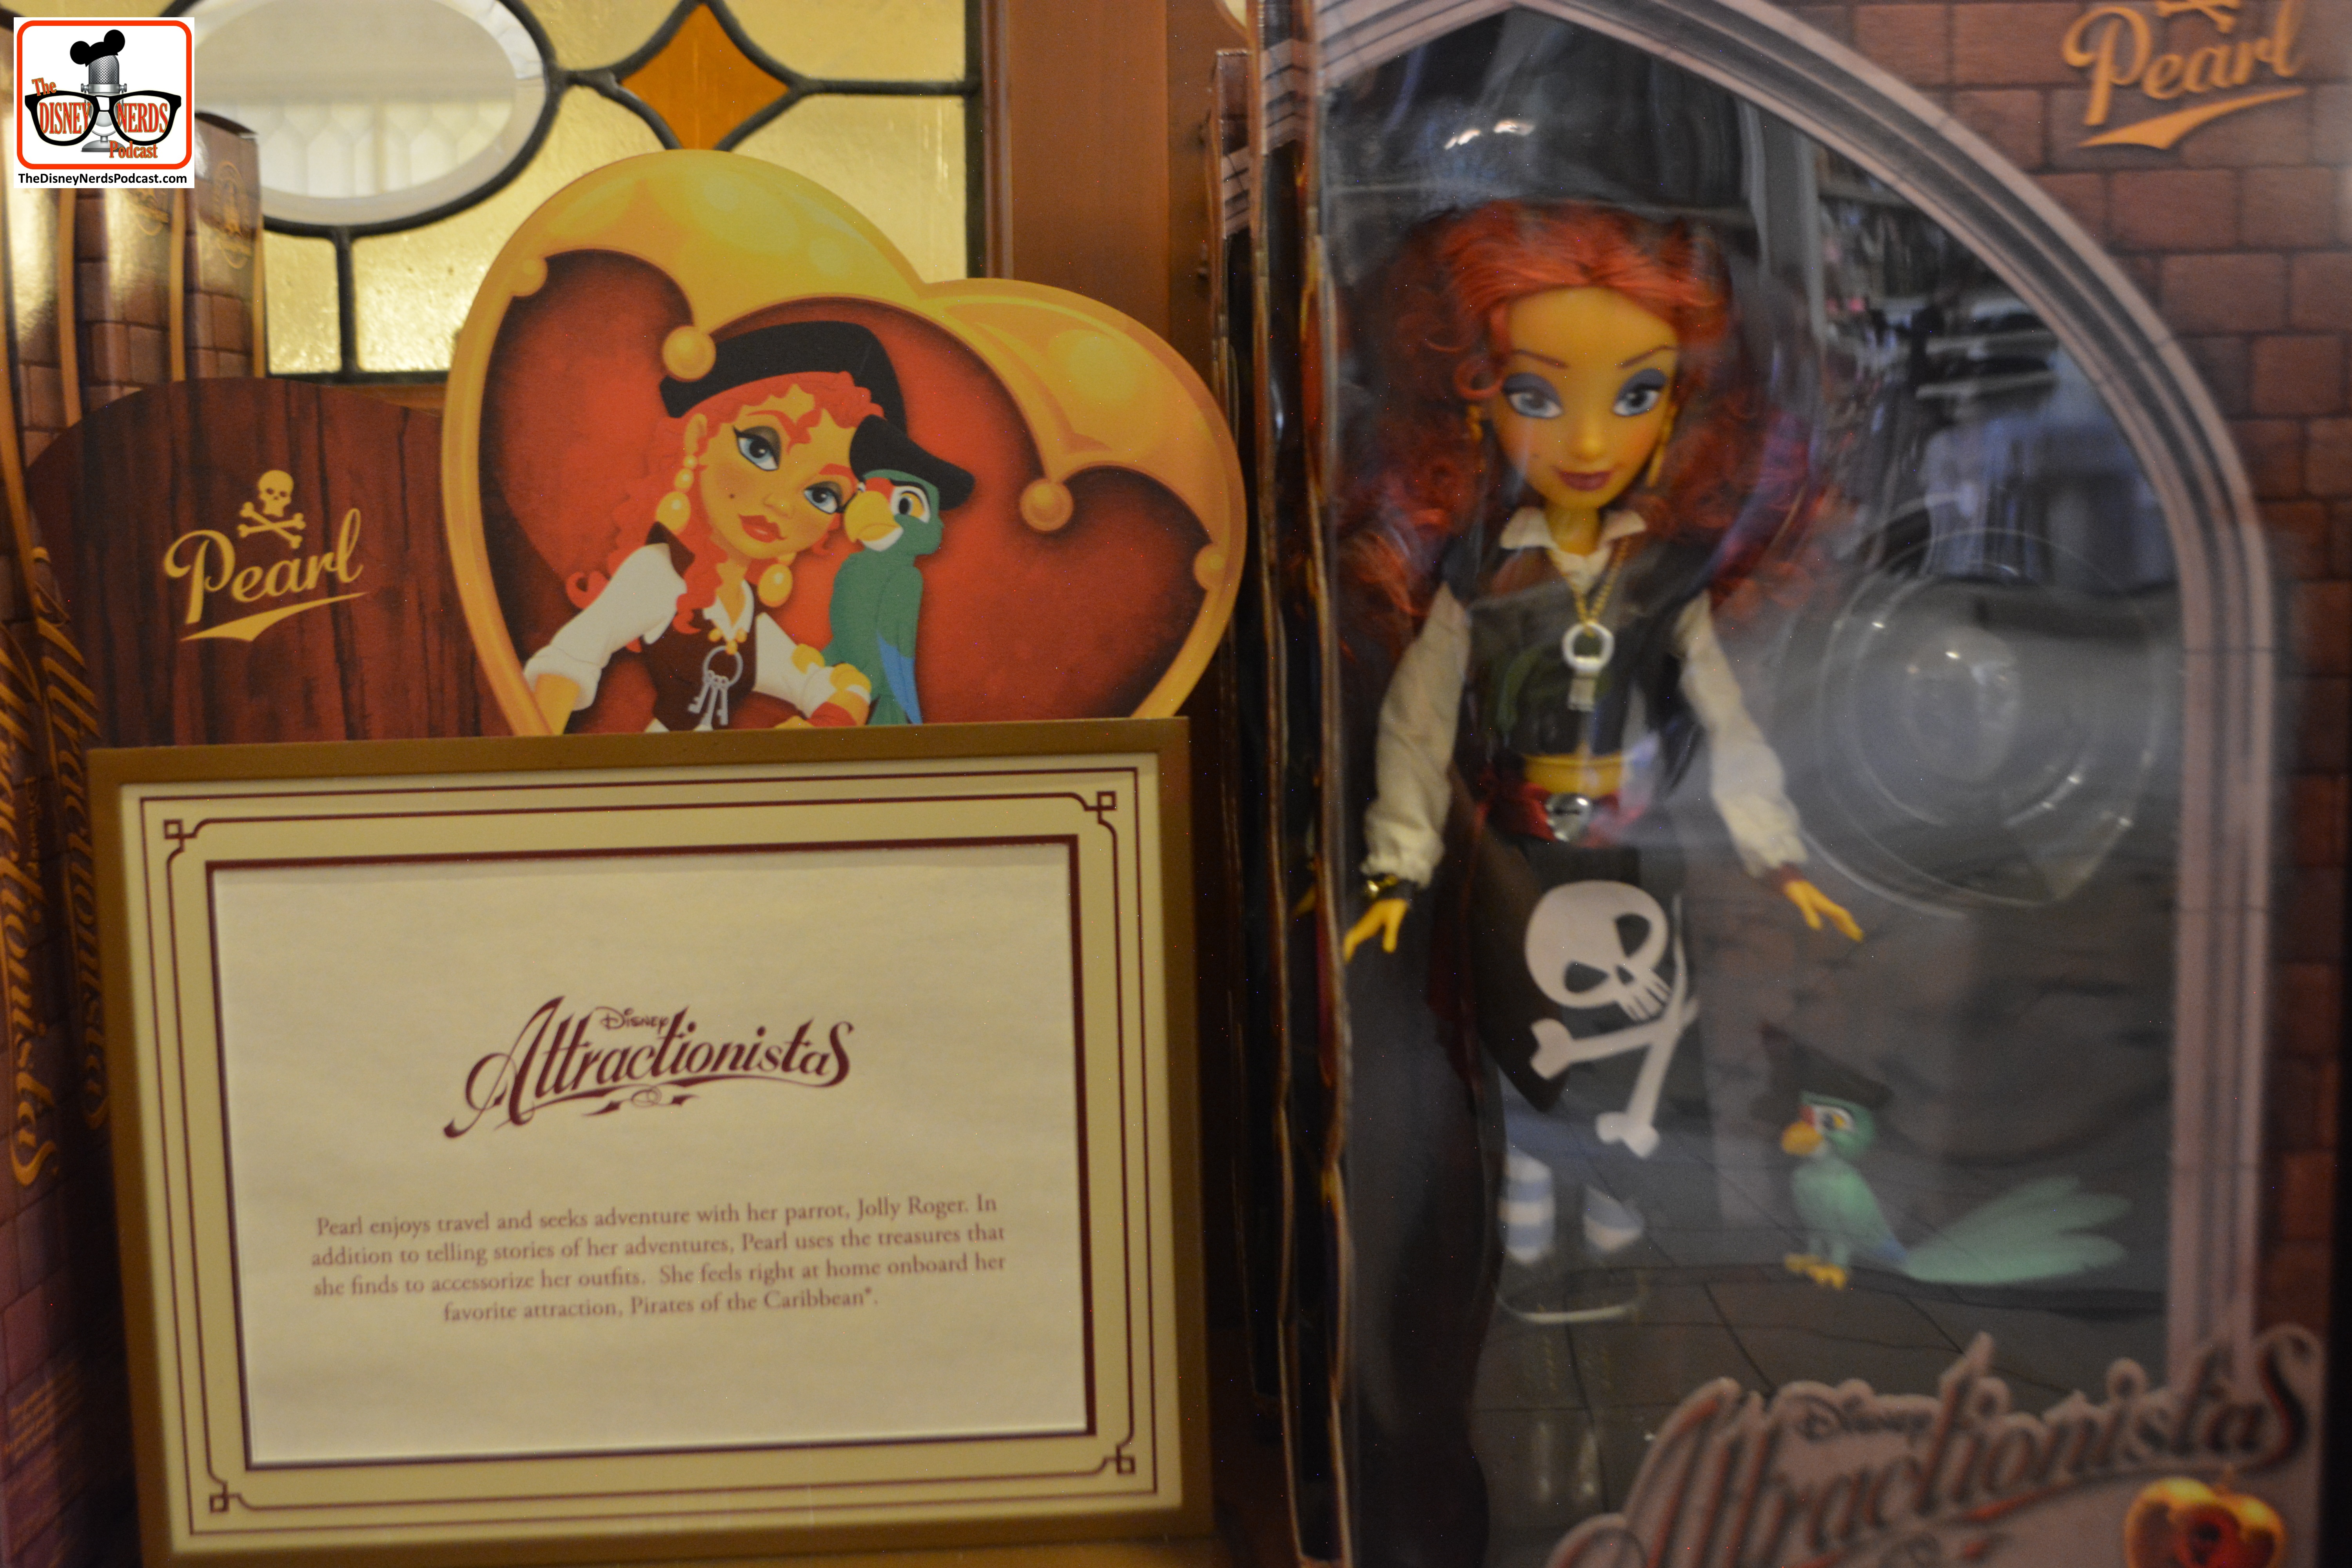 Attractionistas - new collectible line of fashion dolls, each celebrating a classic Disney attraction. This is Pearl from Pirates of the Caribbean